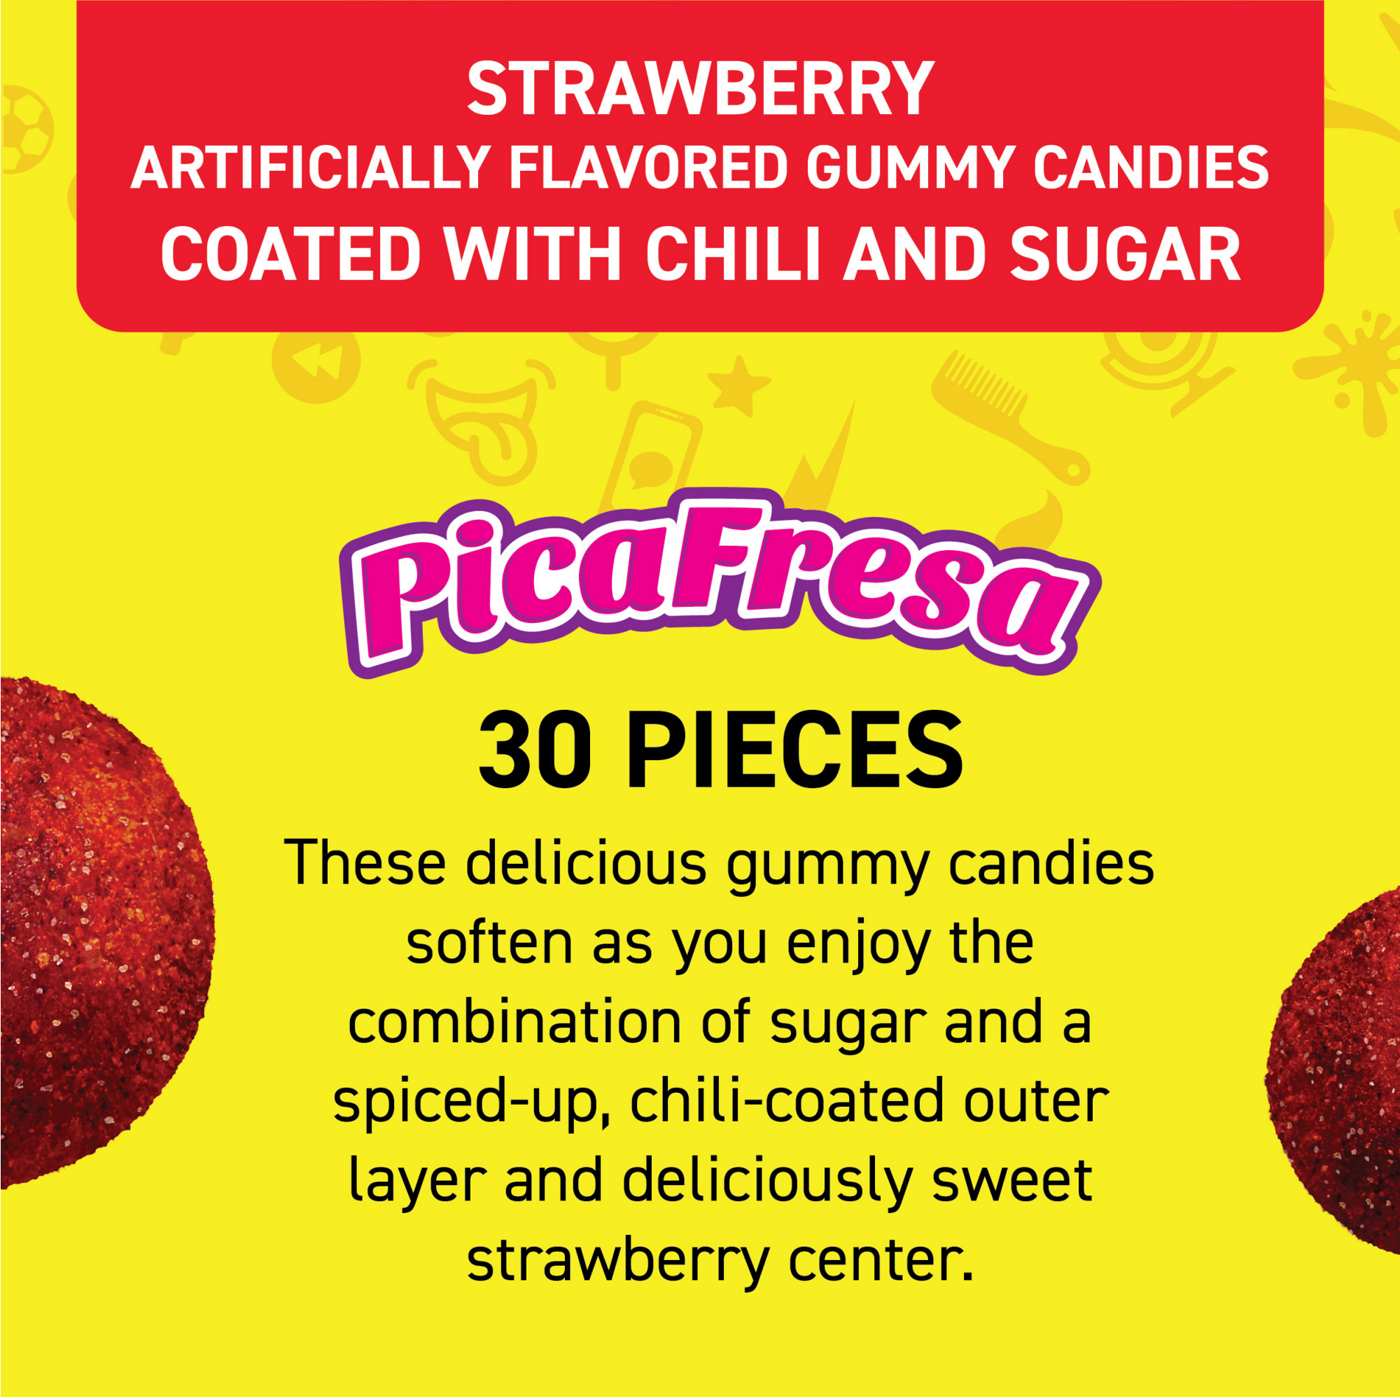 Vero Picafresa Strawberry Chewy Candy; image 2 of 6